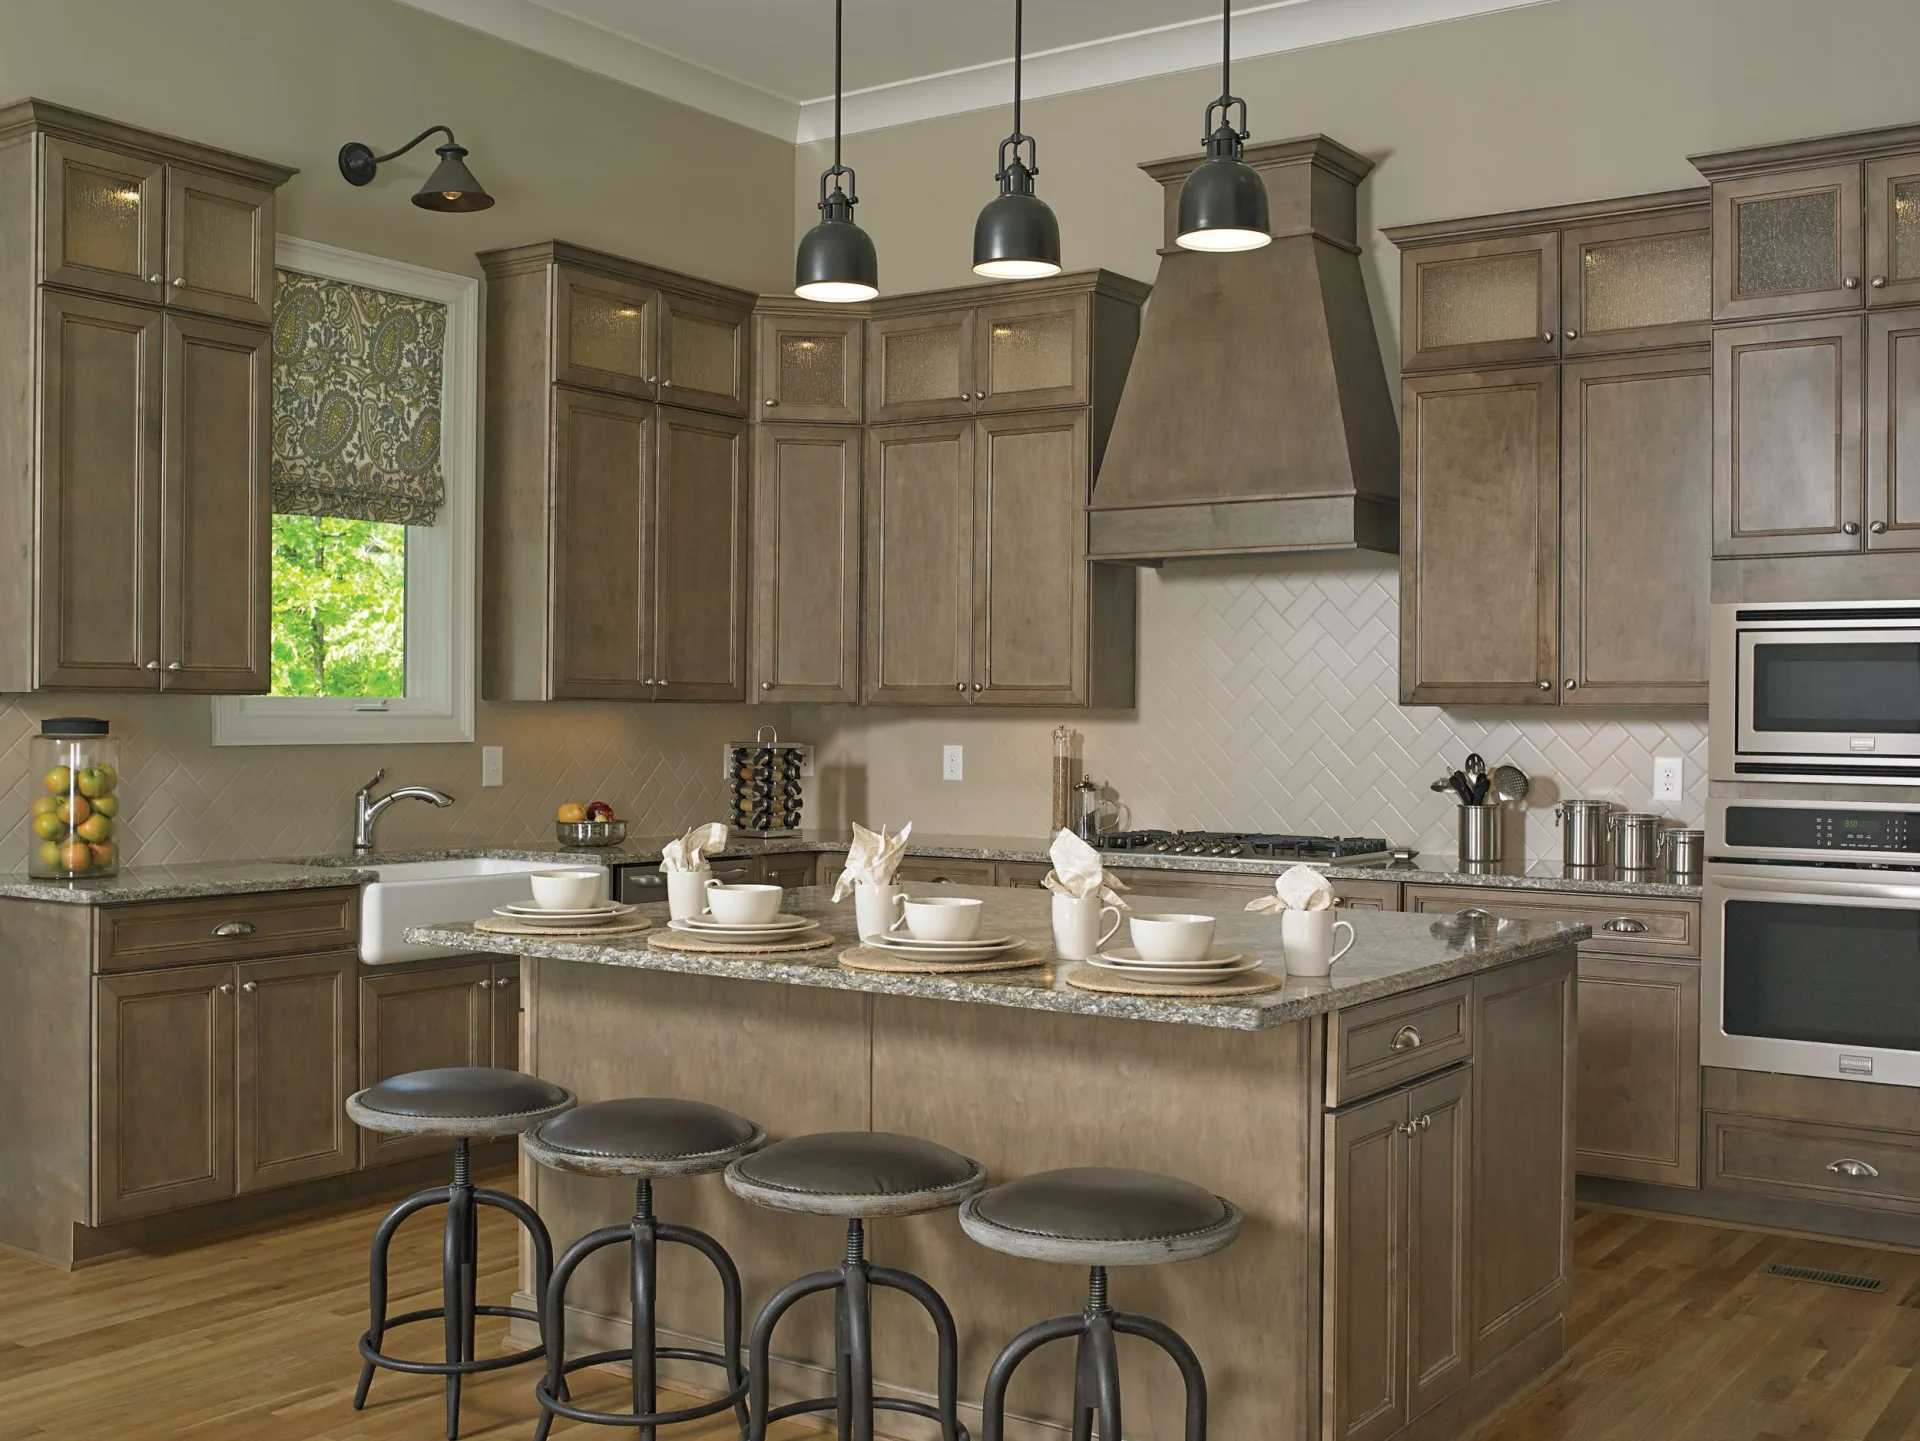 homeowner, meet maple: getting to know maple cabinets